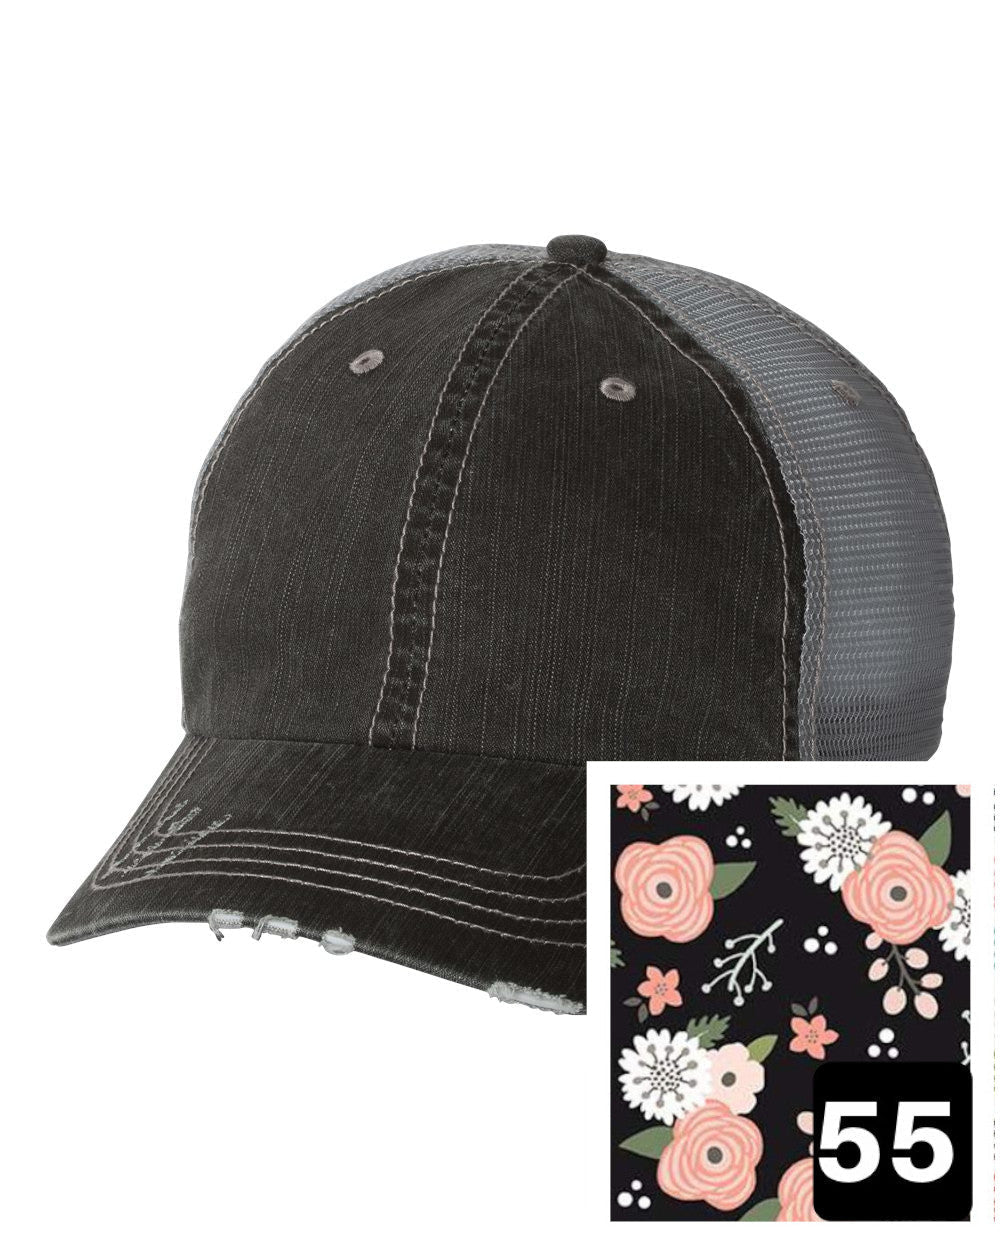 gray distressed trucker hat with petite floral on navy fabric state of Rhode Island